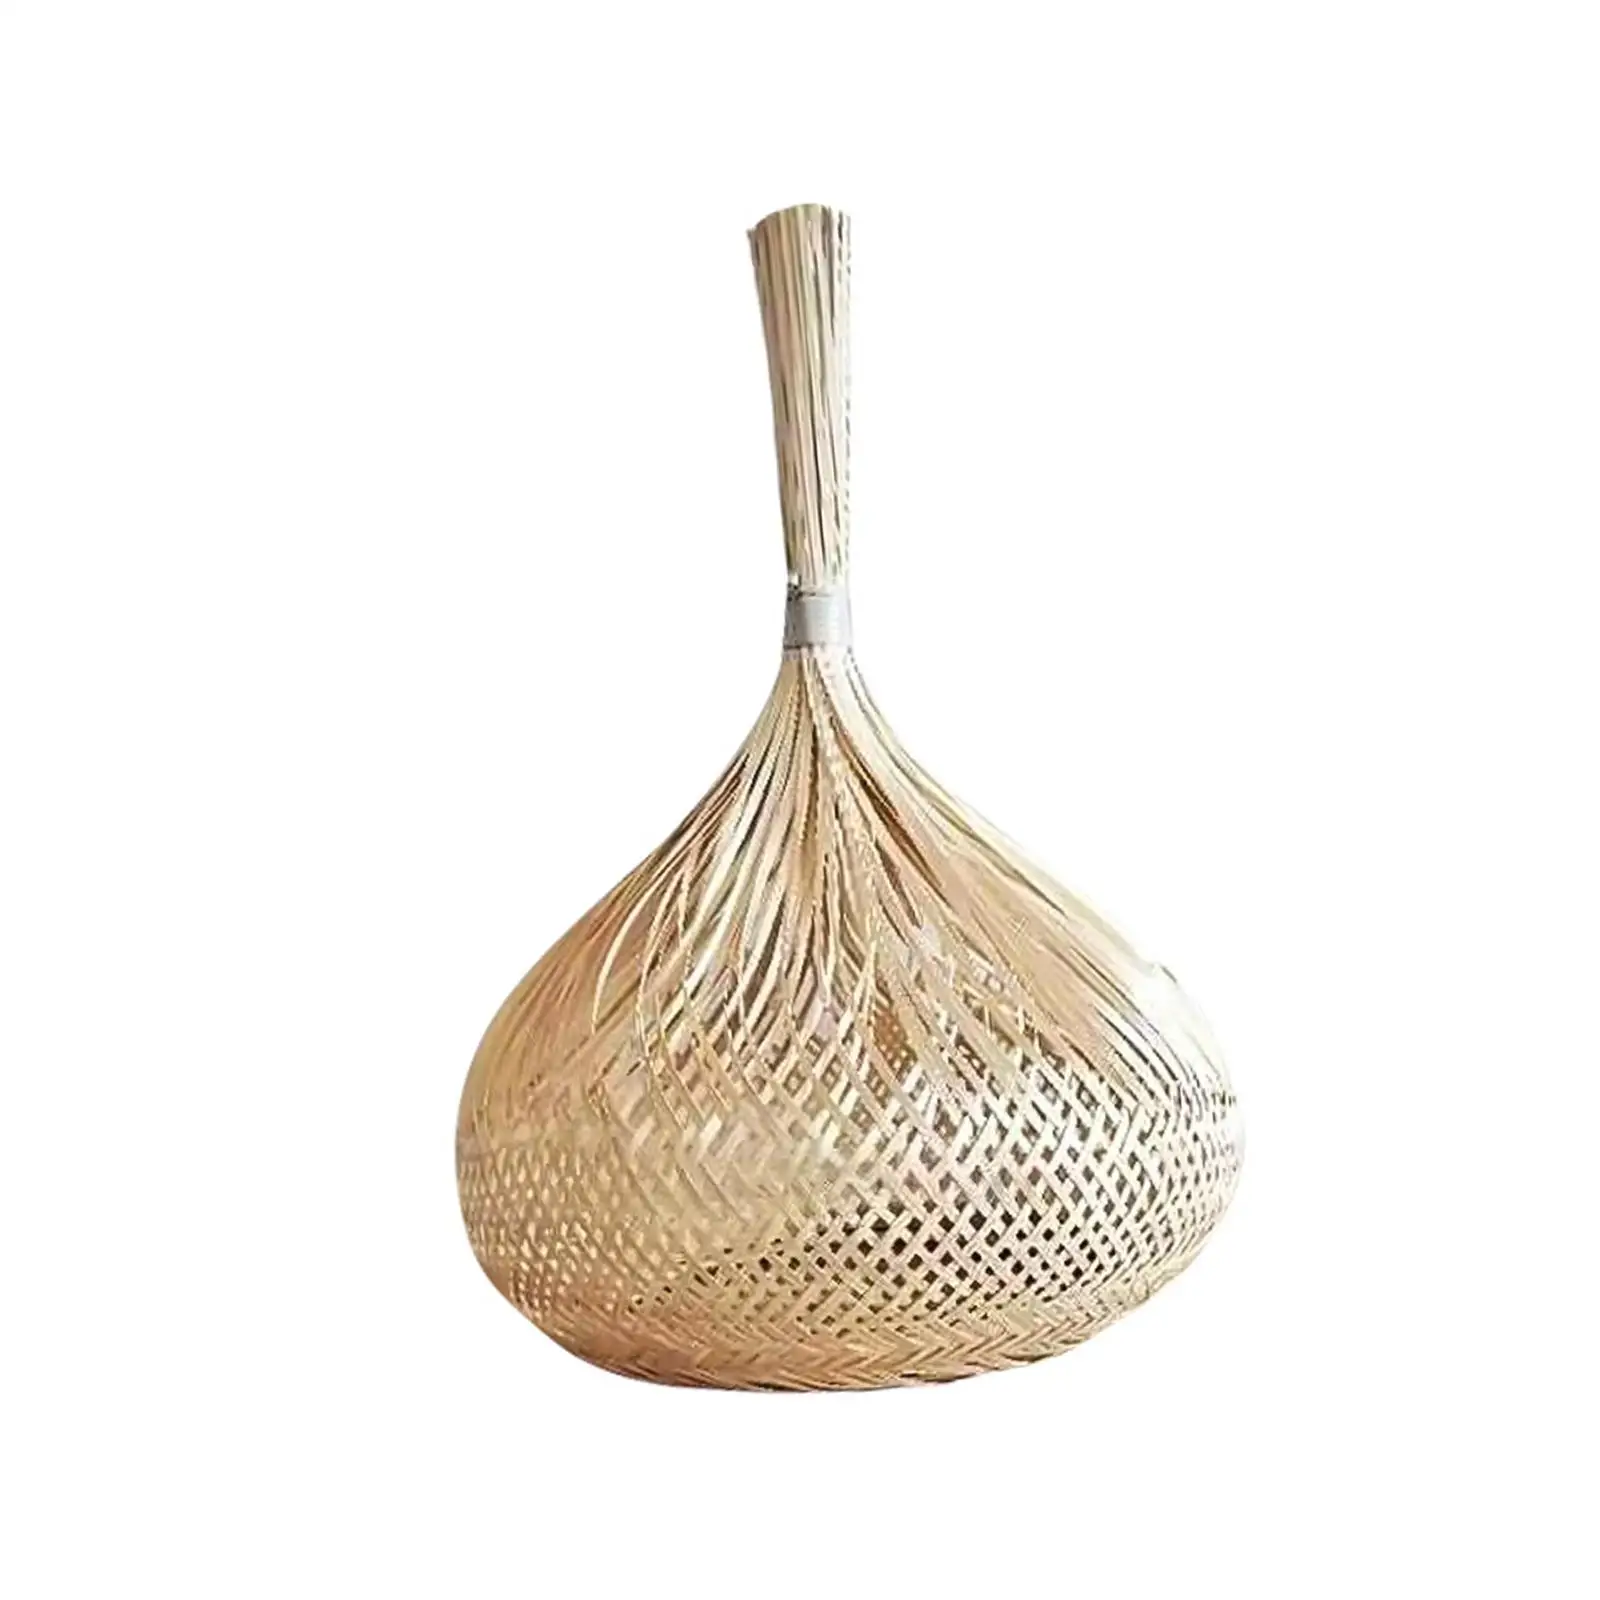 Bamboo Woven Lampshade Handwoven Chandelier Cover for Kitchen Teahouse Hotel